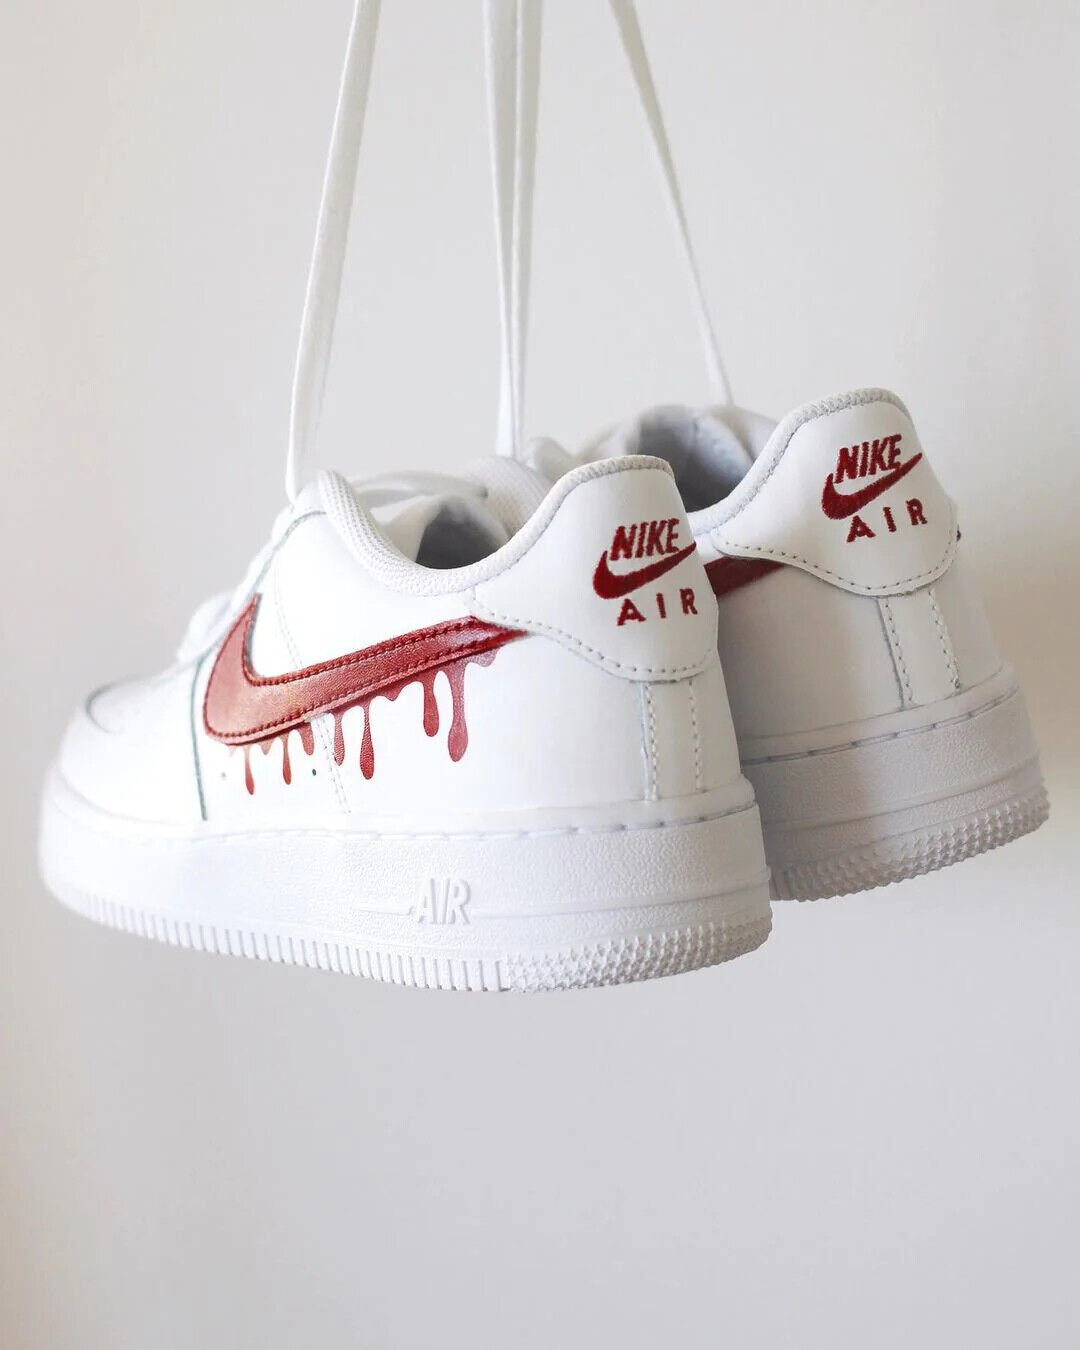 Sneakers  Womens personalized af1/af1 red drip/Nike custom drip/custom af1  gift/red nike custom/shoe gift/womans shoes/kids custom shoes/painted shoes